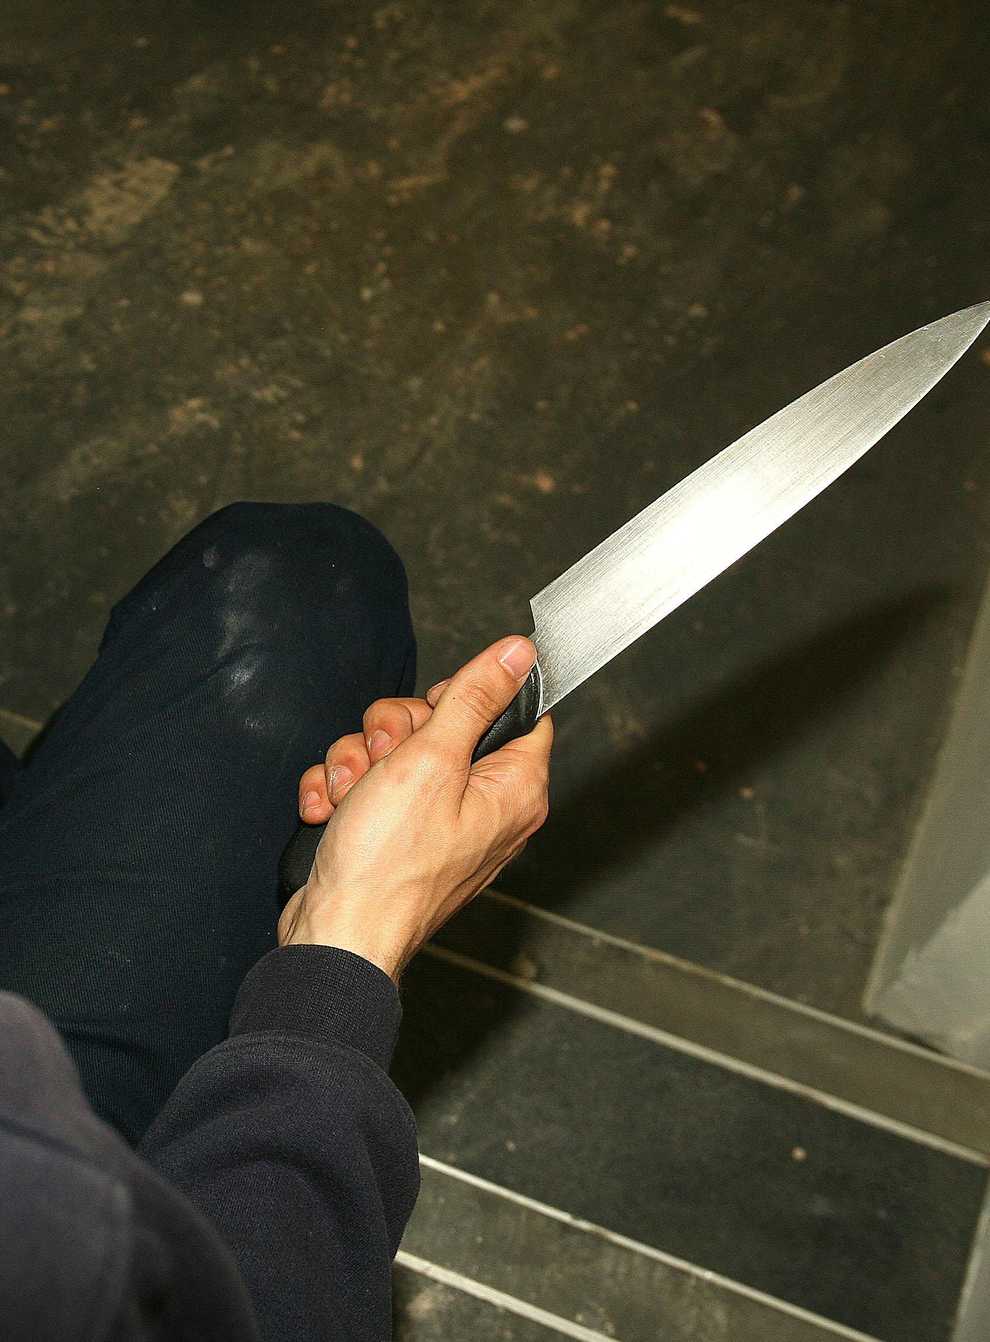 File photo of a man in a hoodie holding a knife. (Katie Collins/PA)